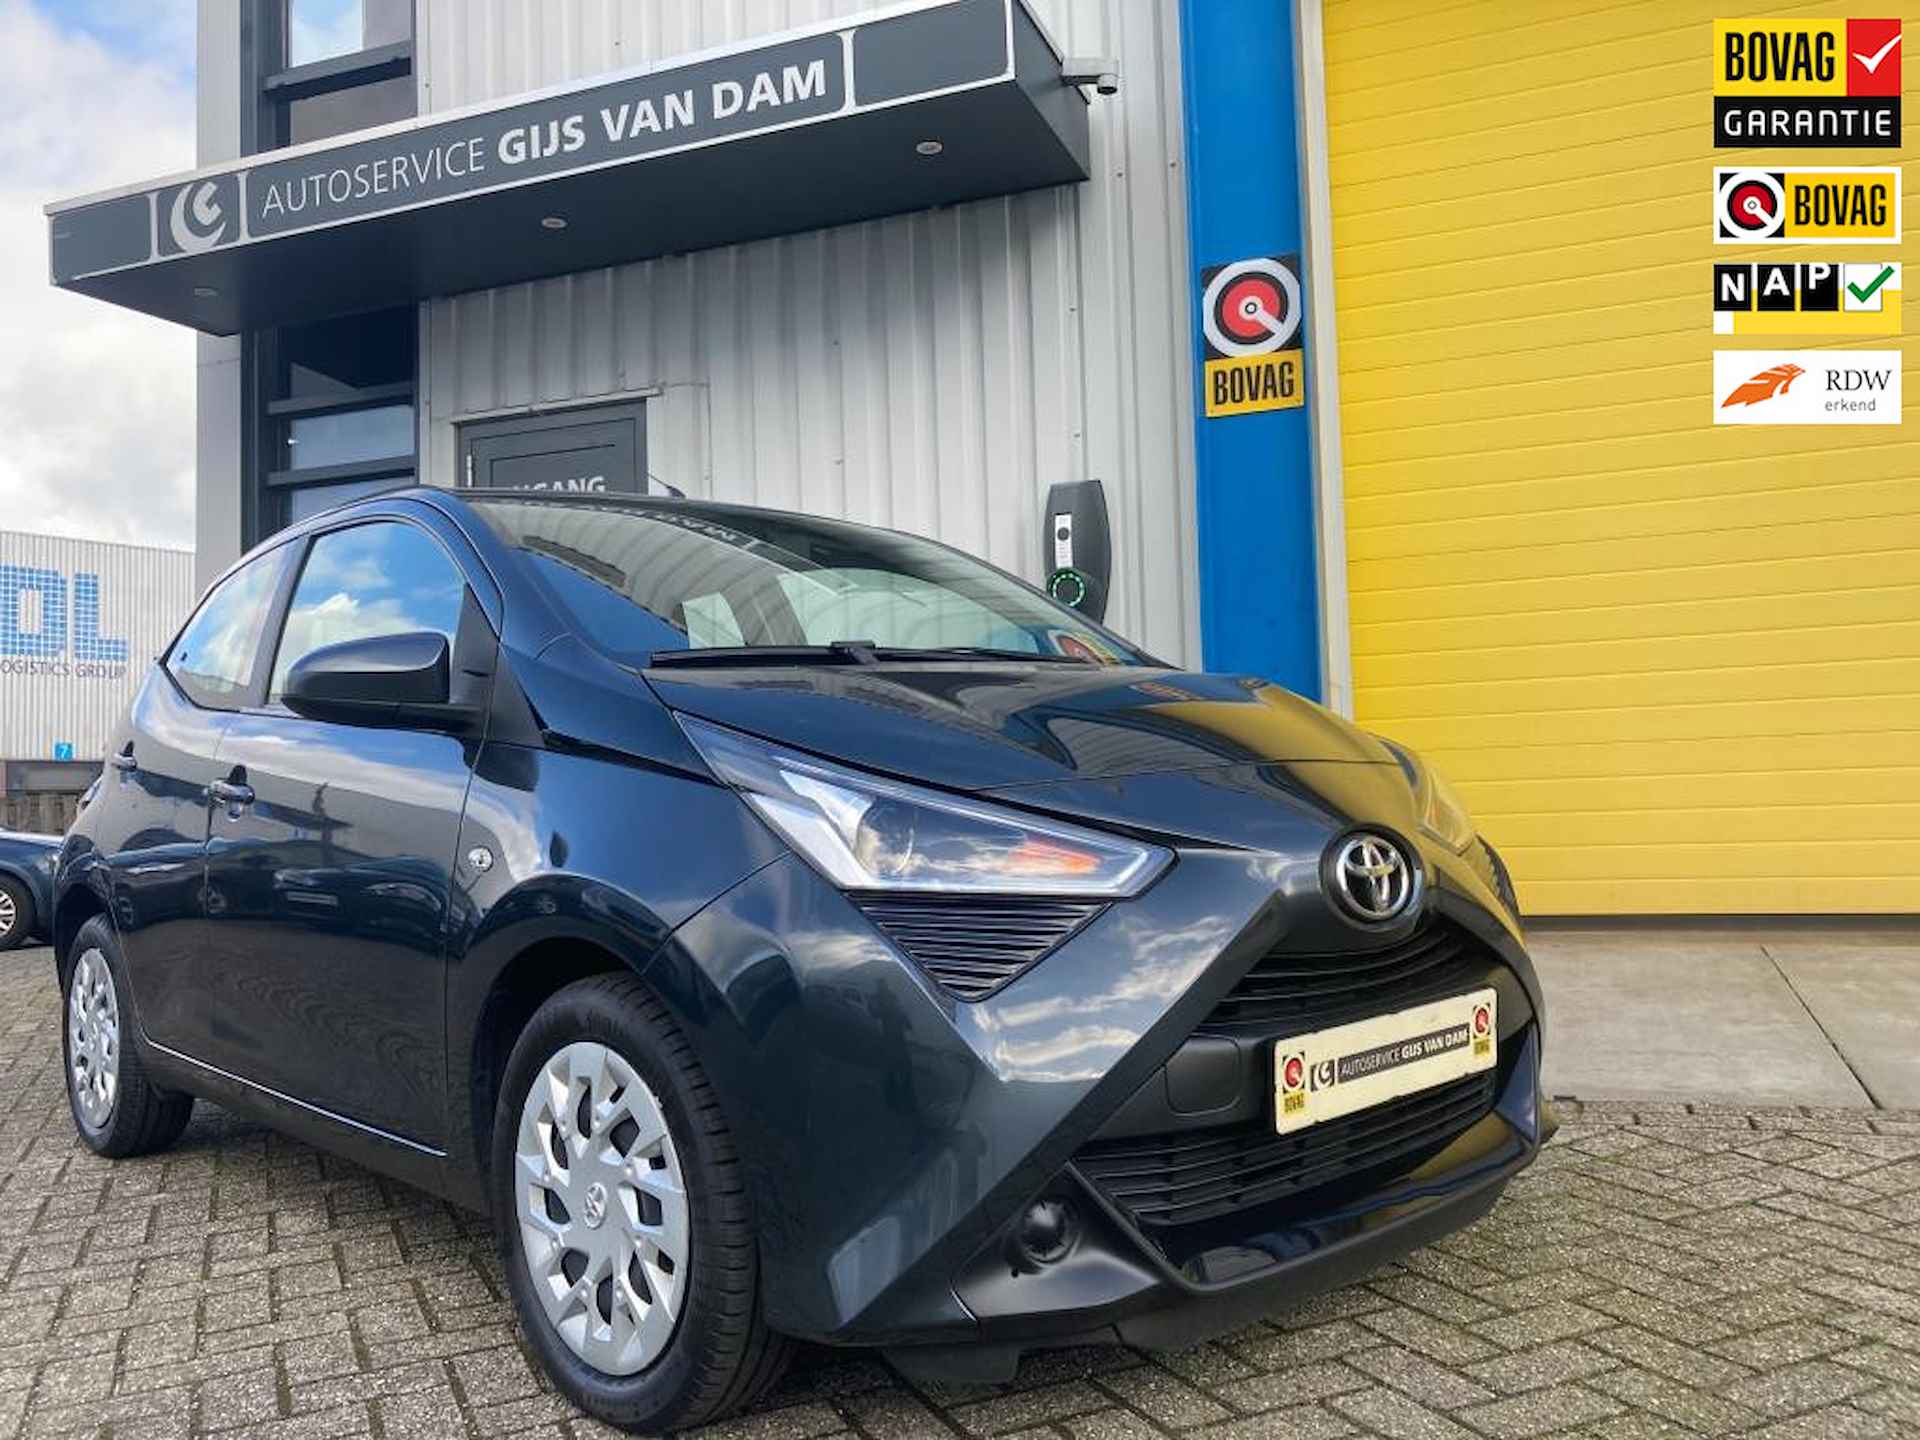 Toyota Aygo 1.0 VVT-i x-play limited "All-in" prijs! - 1/12